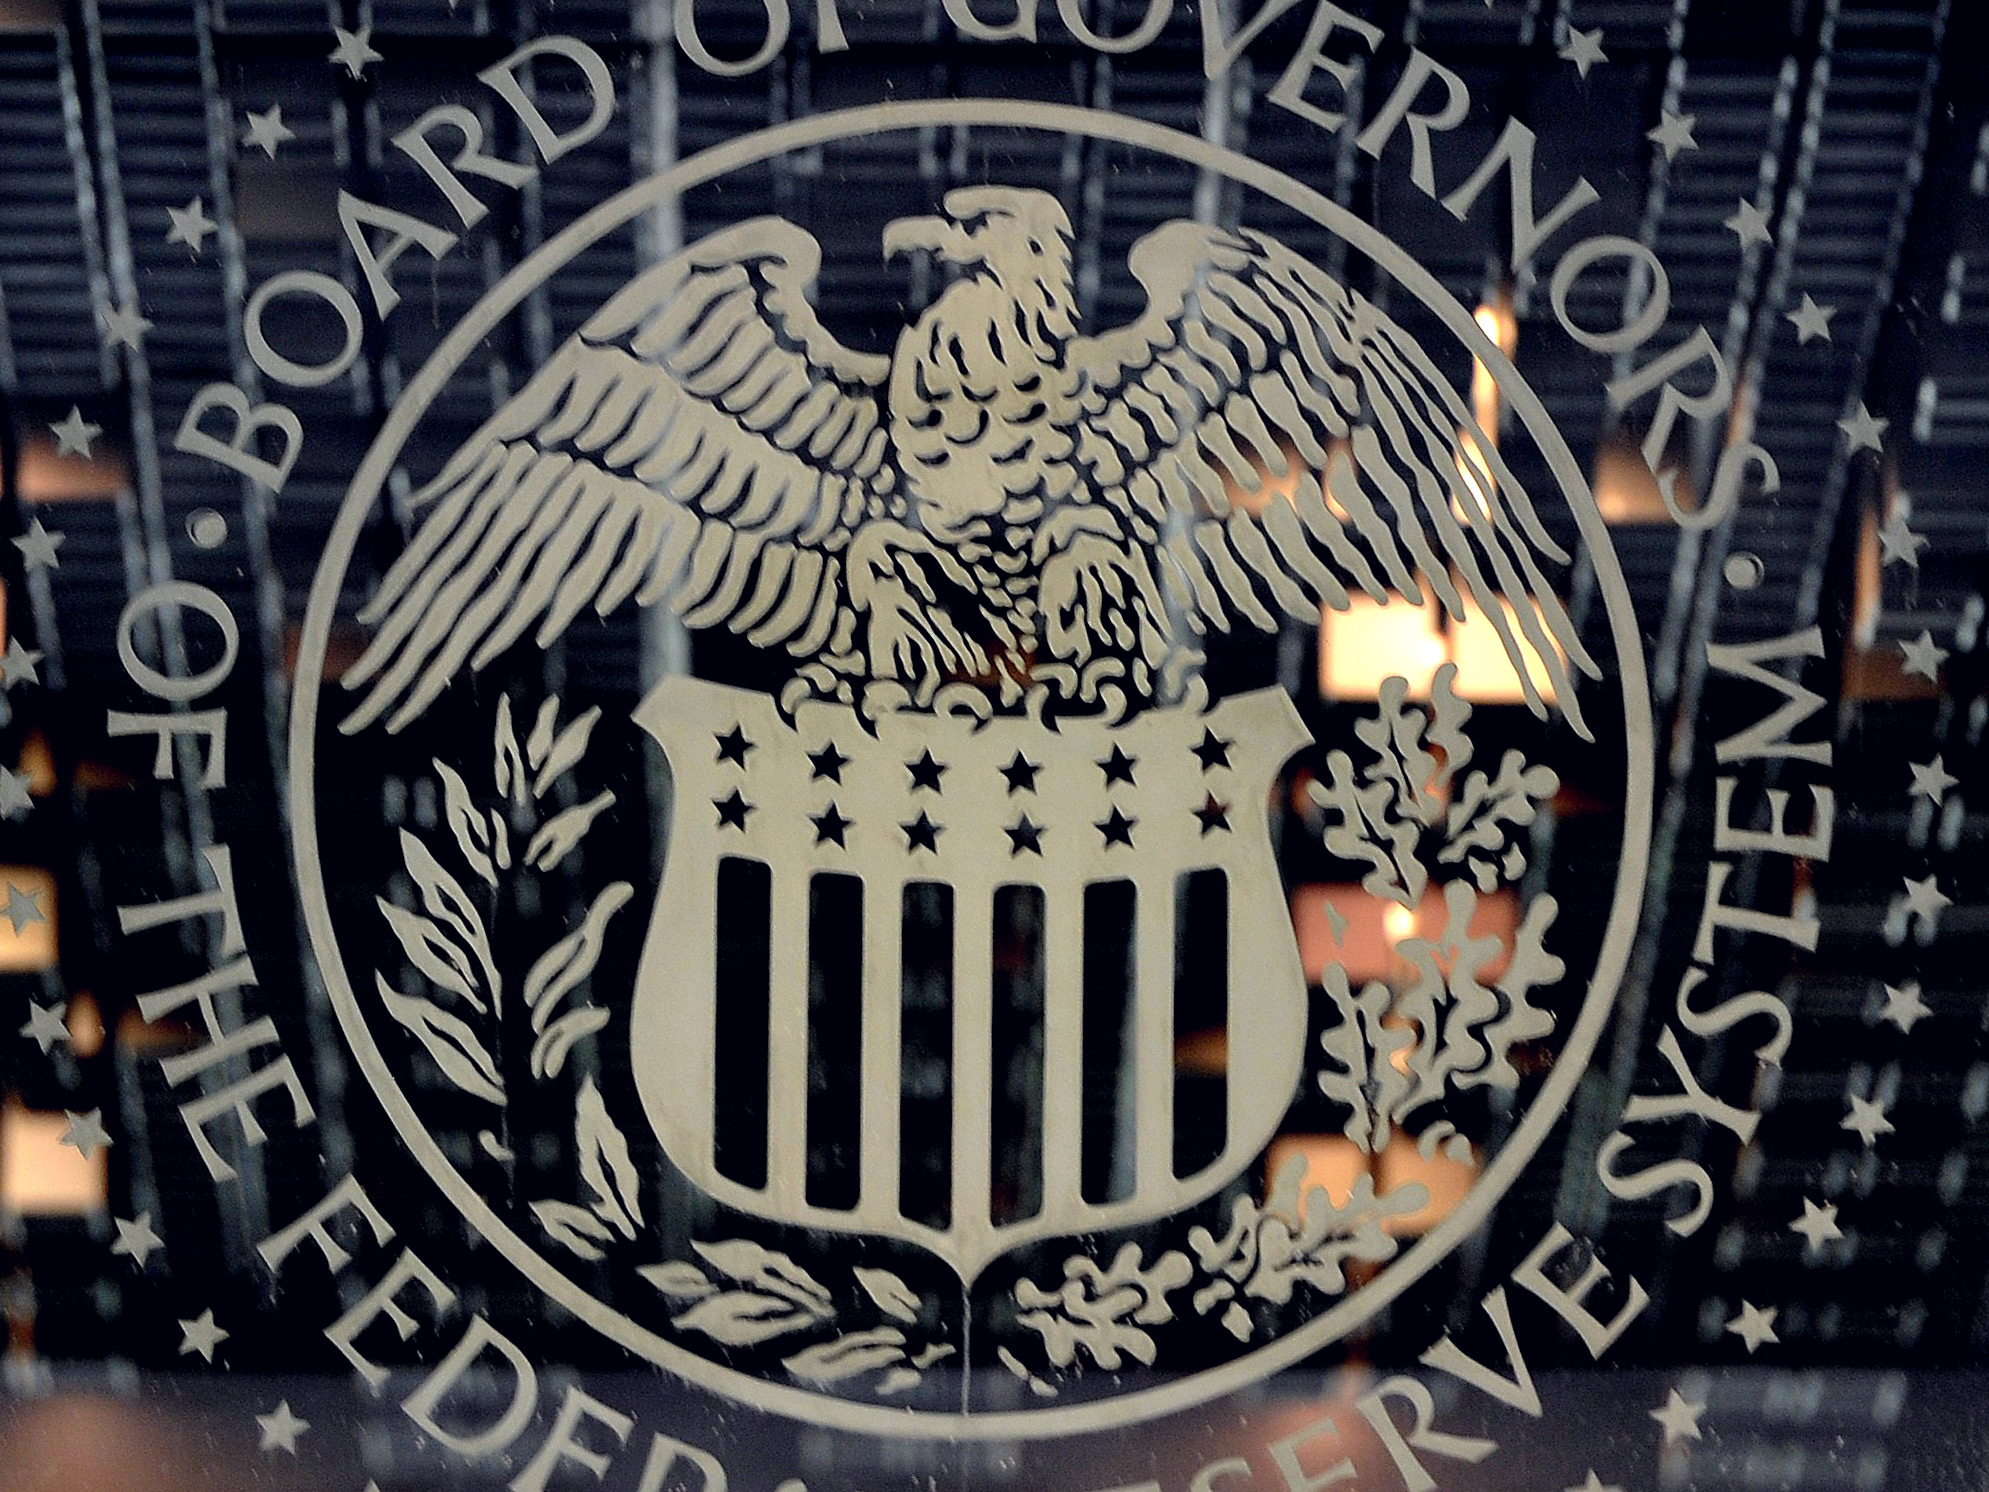 The US Federal Reserve emblem is seen on